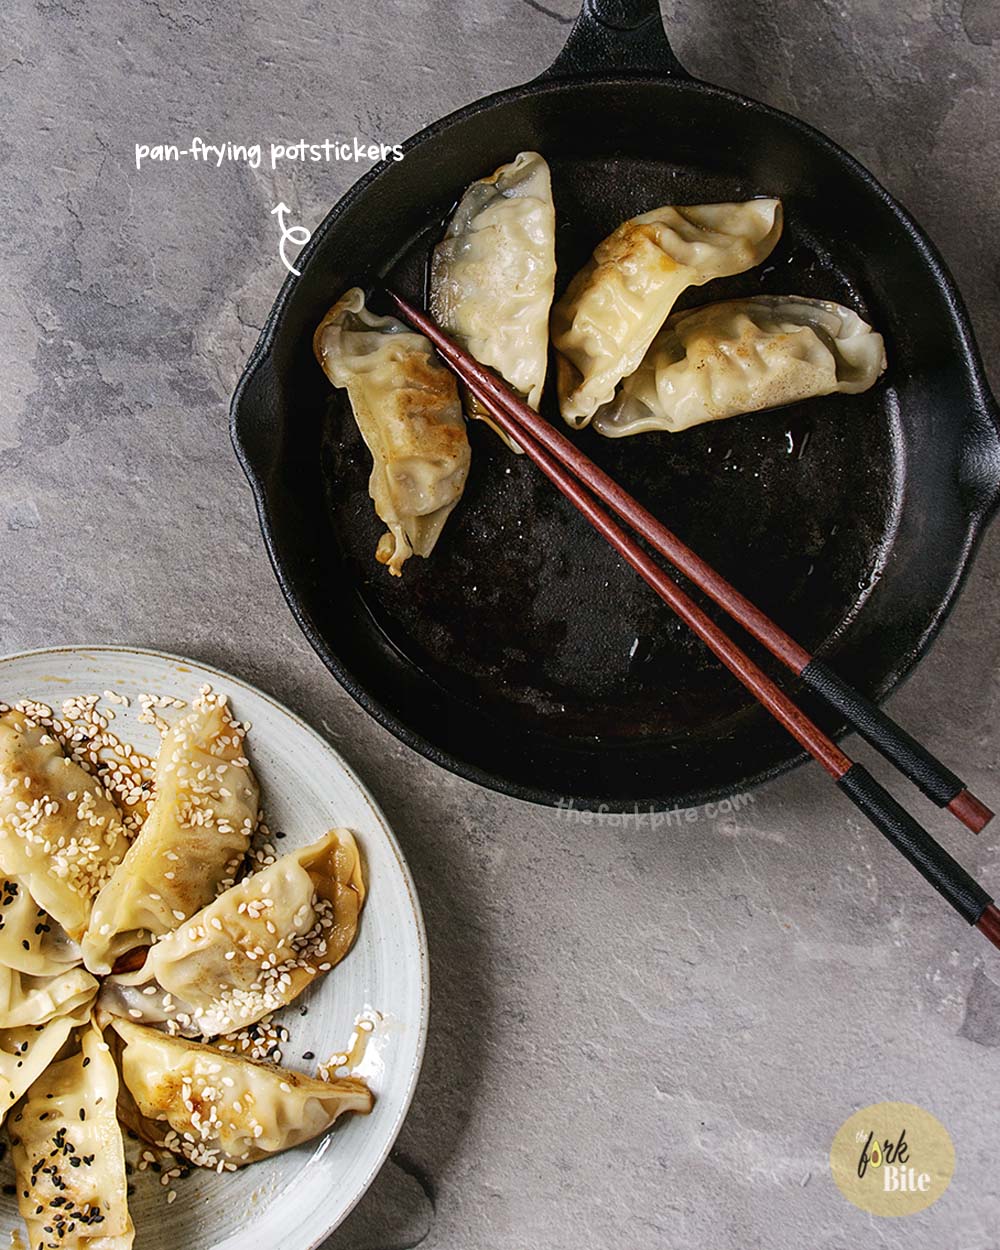 Frozen dumplings have a habit of sticking to the inside of a bamboo steamer. You need to line it first. One of the best ways I found of lining my steamer is to use Napa cabbage.